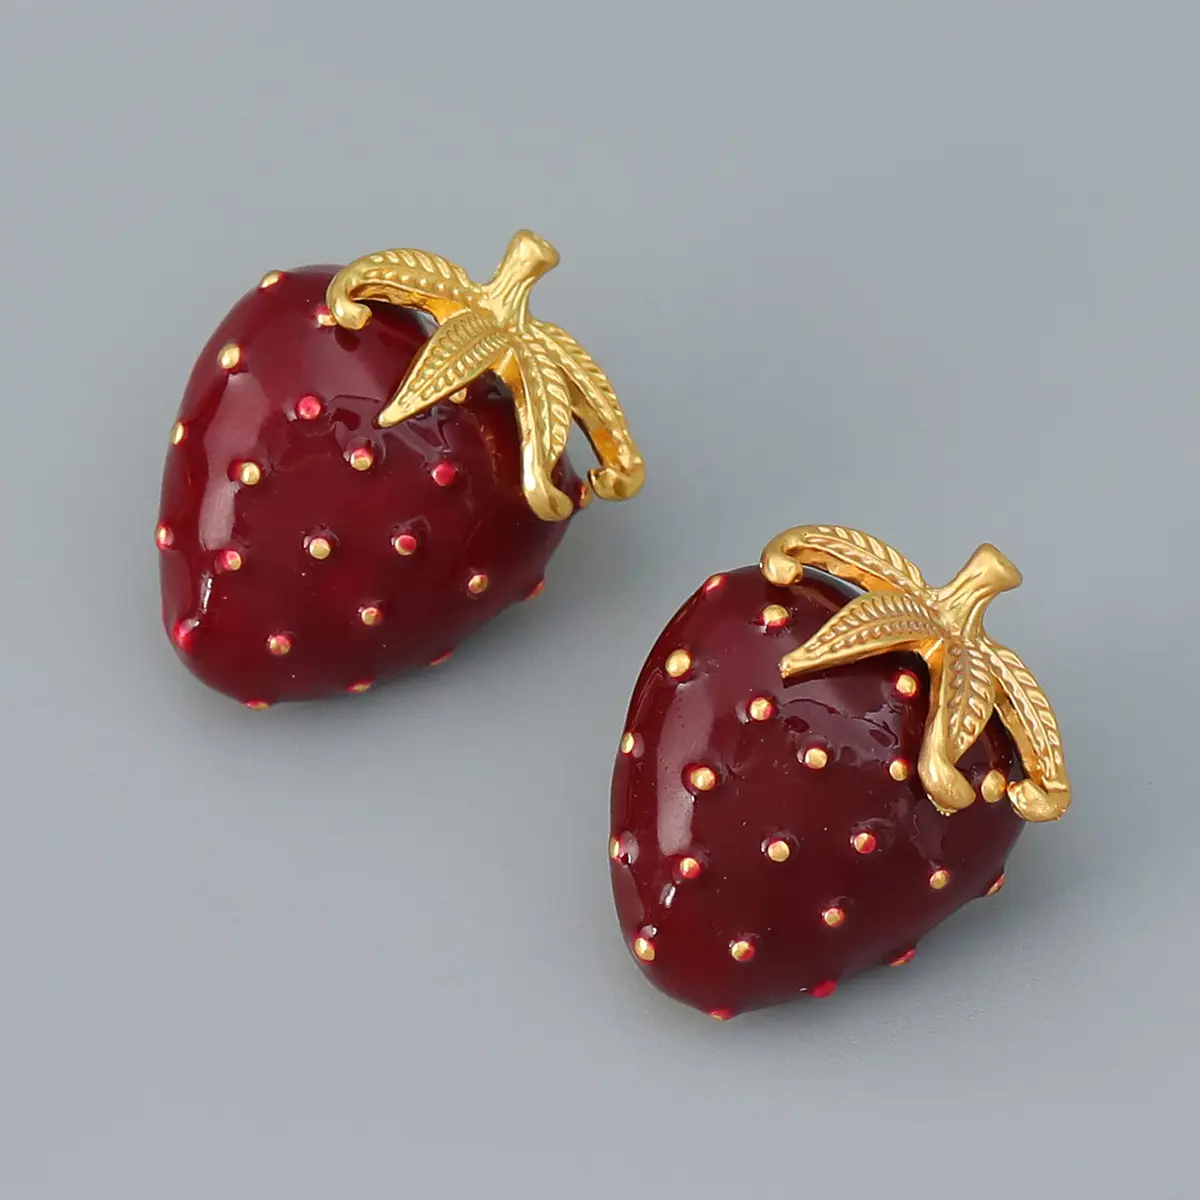 Designer Earings Jewelry Luxury Designer Collection Red Cute Strawberry Earrings 3D Fruit Stud Earring Jewelry Birthday Gifts